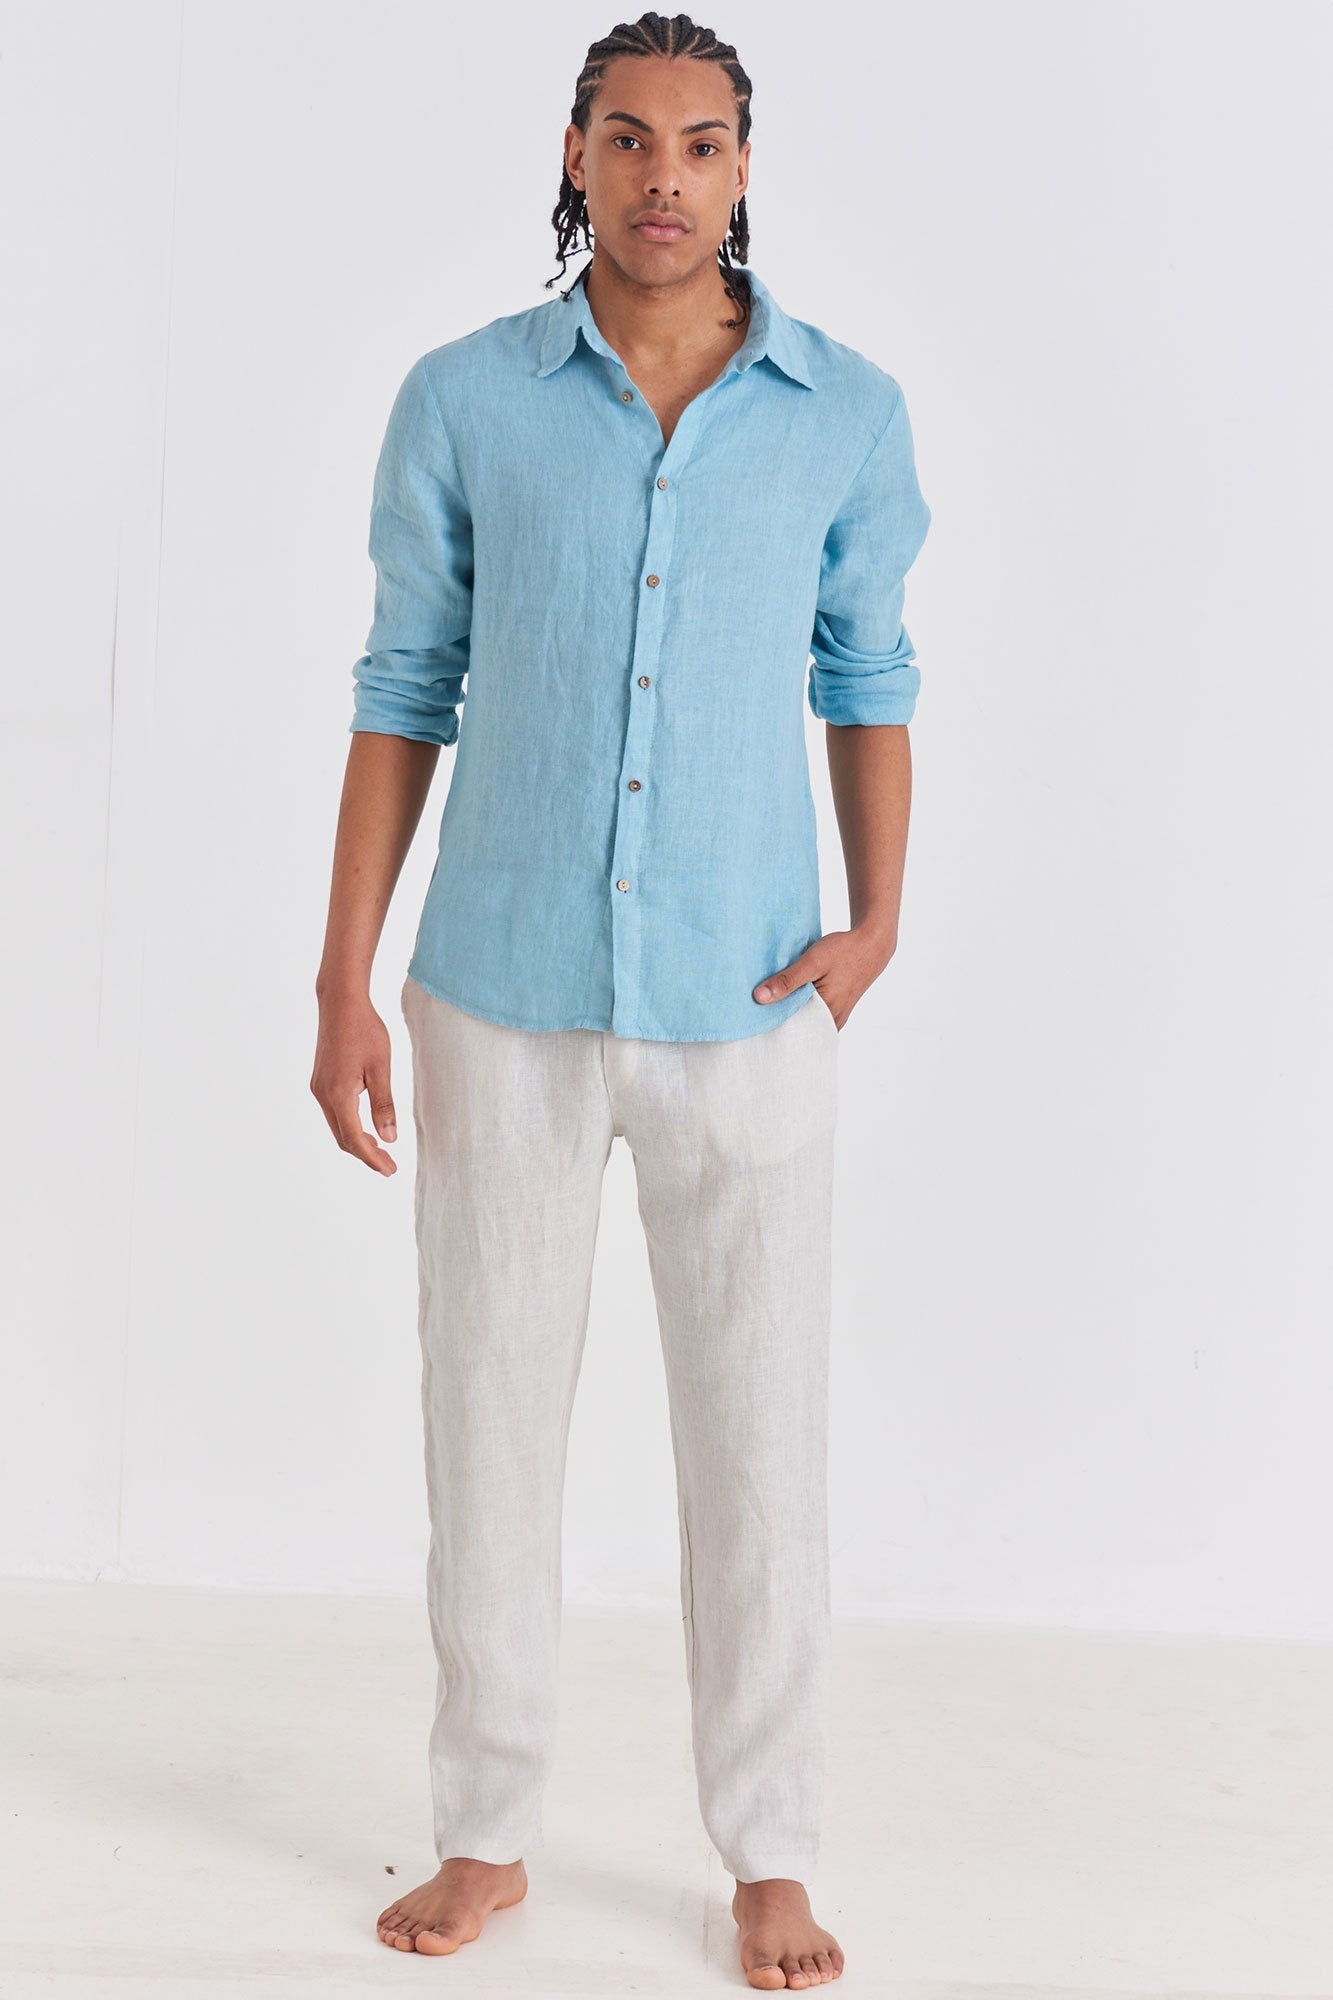 Natural Tailored Linen Pants - Polonio